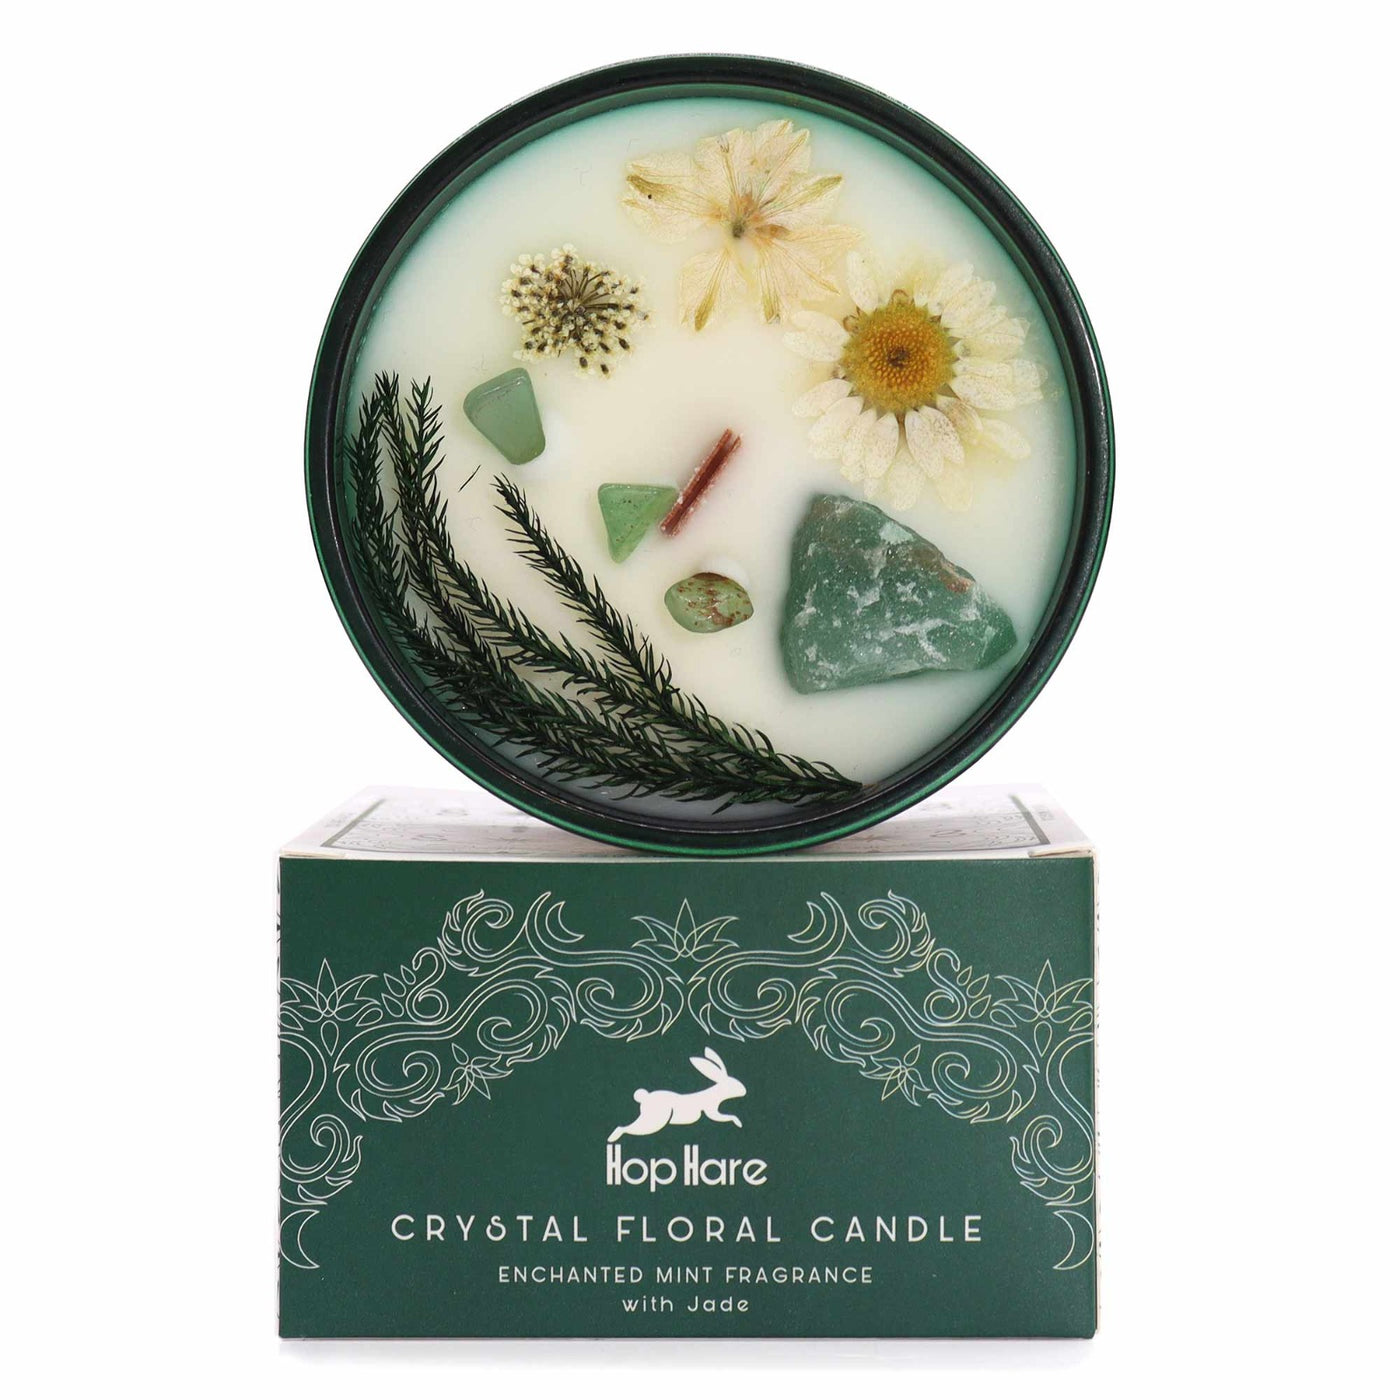 Hop Hare The Magician Mint Flowers And Jade Stone Magic Flower Wooden Wick Candle In Glass Jar.